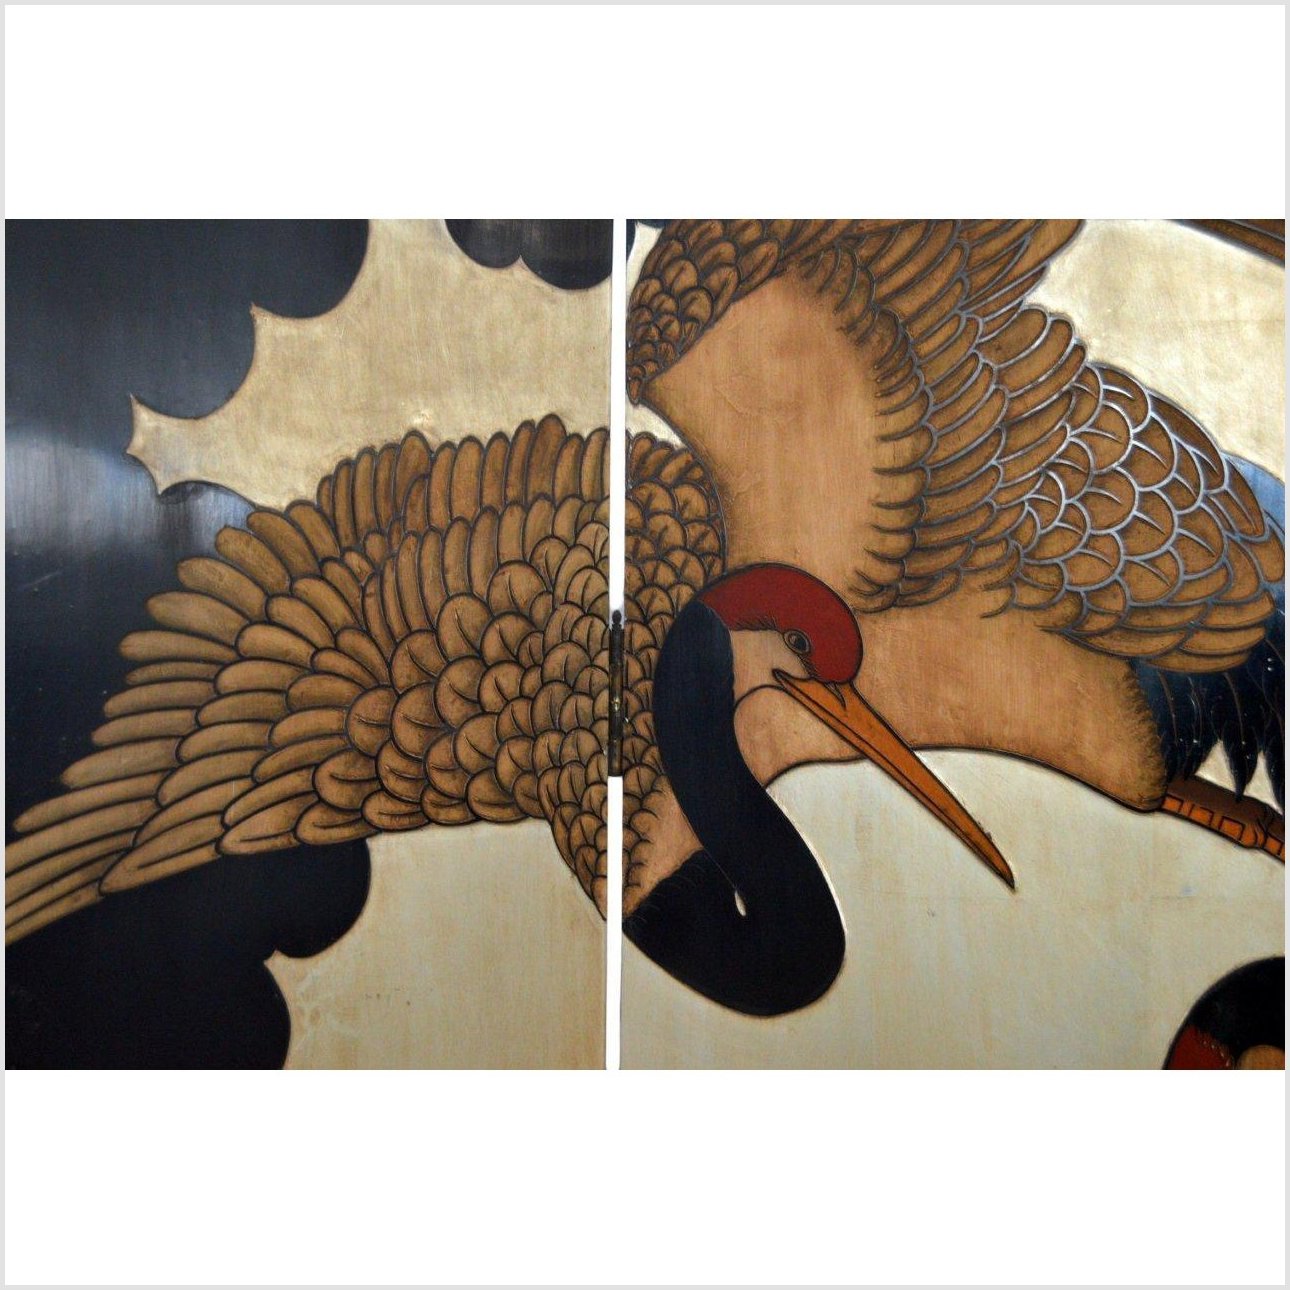 4-Panel Screen Depicting Flock of Cranes-YN2886-7. Asian & Chinese Furniture, Art, Antiques, Vintage Home Décor for sale at FEA Home